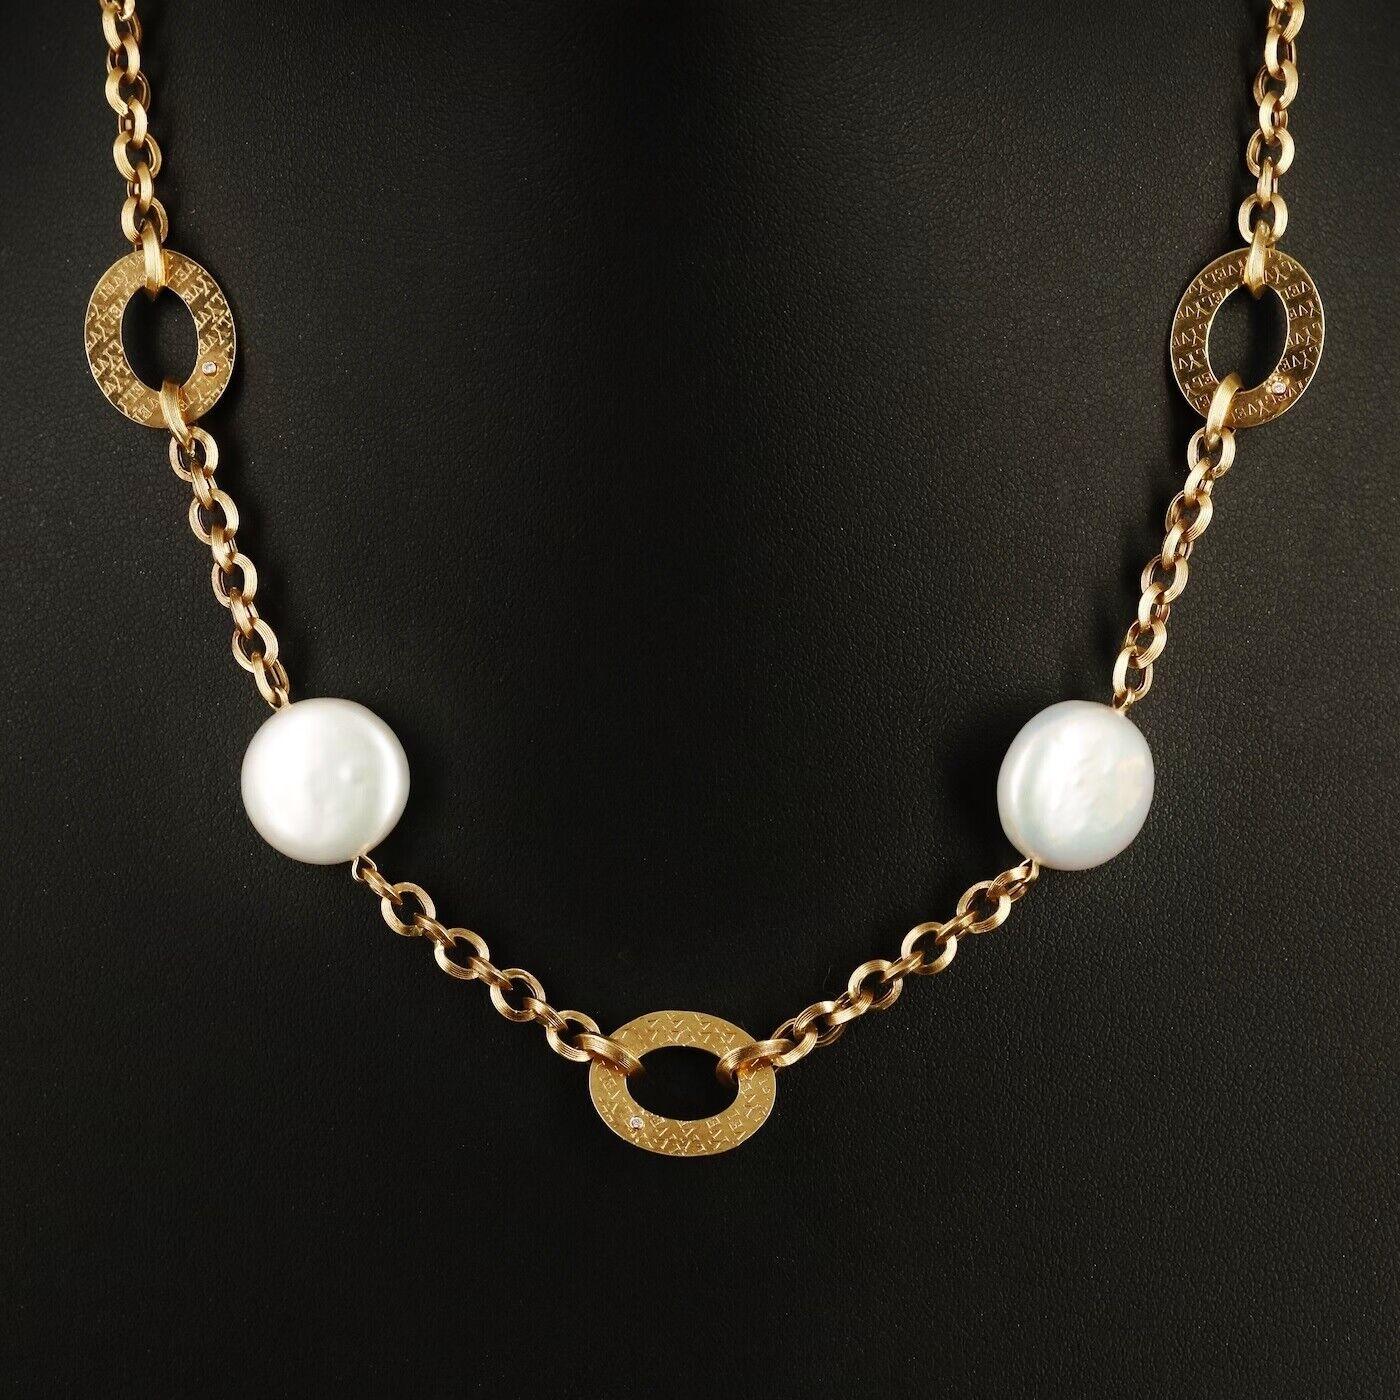 Designer Yvel Necklace (stamped with the designer hallmarks)

BIWA Collection, BIWA Natural Japanese Coin pearls

NEW with tags, Tag Price $9750

18K solid Yellow gold

Very heavy and well made, 16.7 grams in weight 

Top Quality Diamond and Pearls,